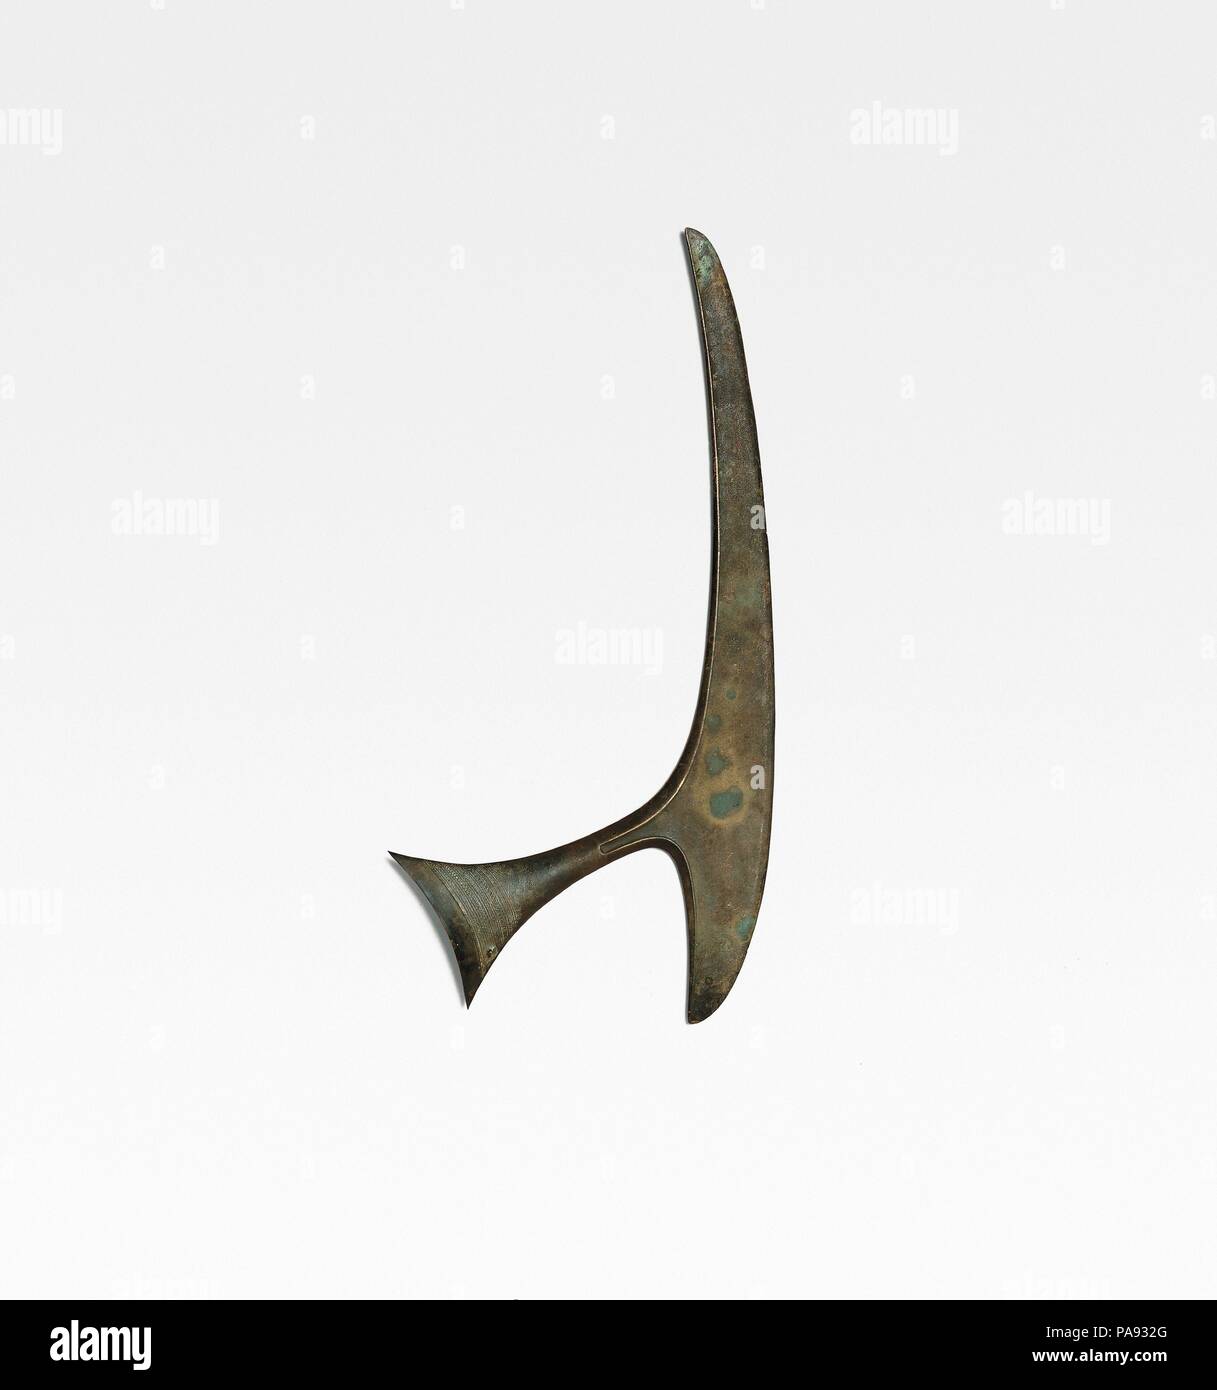 Crescent-Shaped Ax Head (Chandrasa). Culture: Indonesia. Dimensions: Approx. L. 24 in. (61 cm). Date: ca. 500 B.C.-A.D. 300.  The flamboyant curved blade and asymmetrically placed splayed socket of this piece are typical of works from Java and Sulewasi, produced in full size and as miniatures, and used as funerary gifts and for ceremony and display. Axes are often carried by the feathered warriors depicted on drums and situlae from the Dongson culture of Vietnam, and late Dongson ax heads with pediform or boat-like shaped are other thought to have provided prototypes for the exaggerated exampl Stock Photo